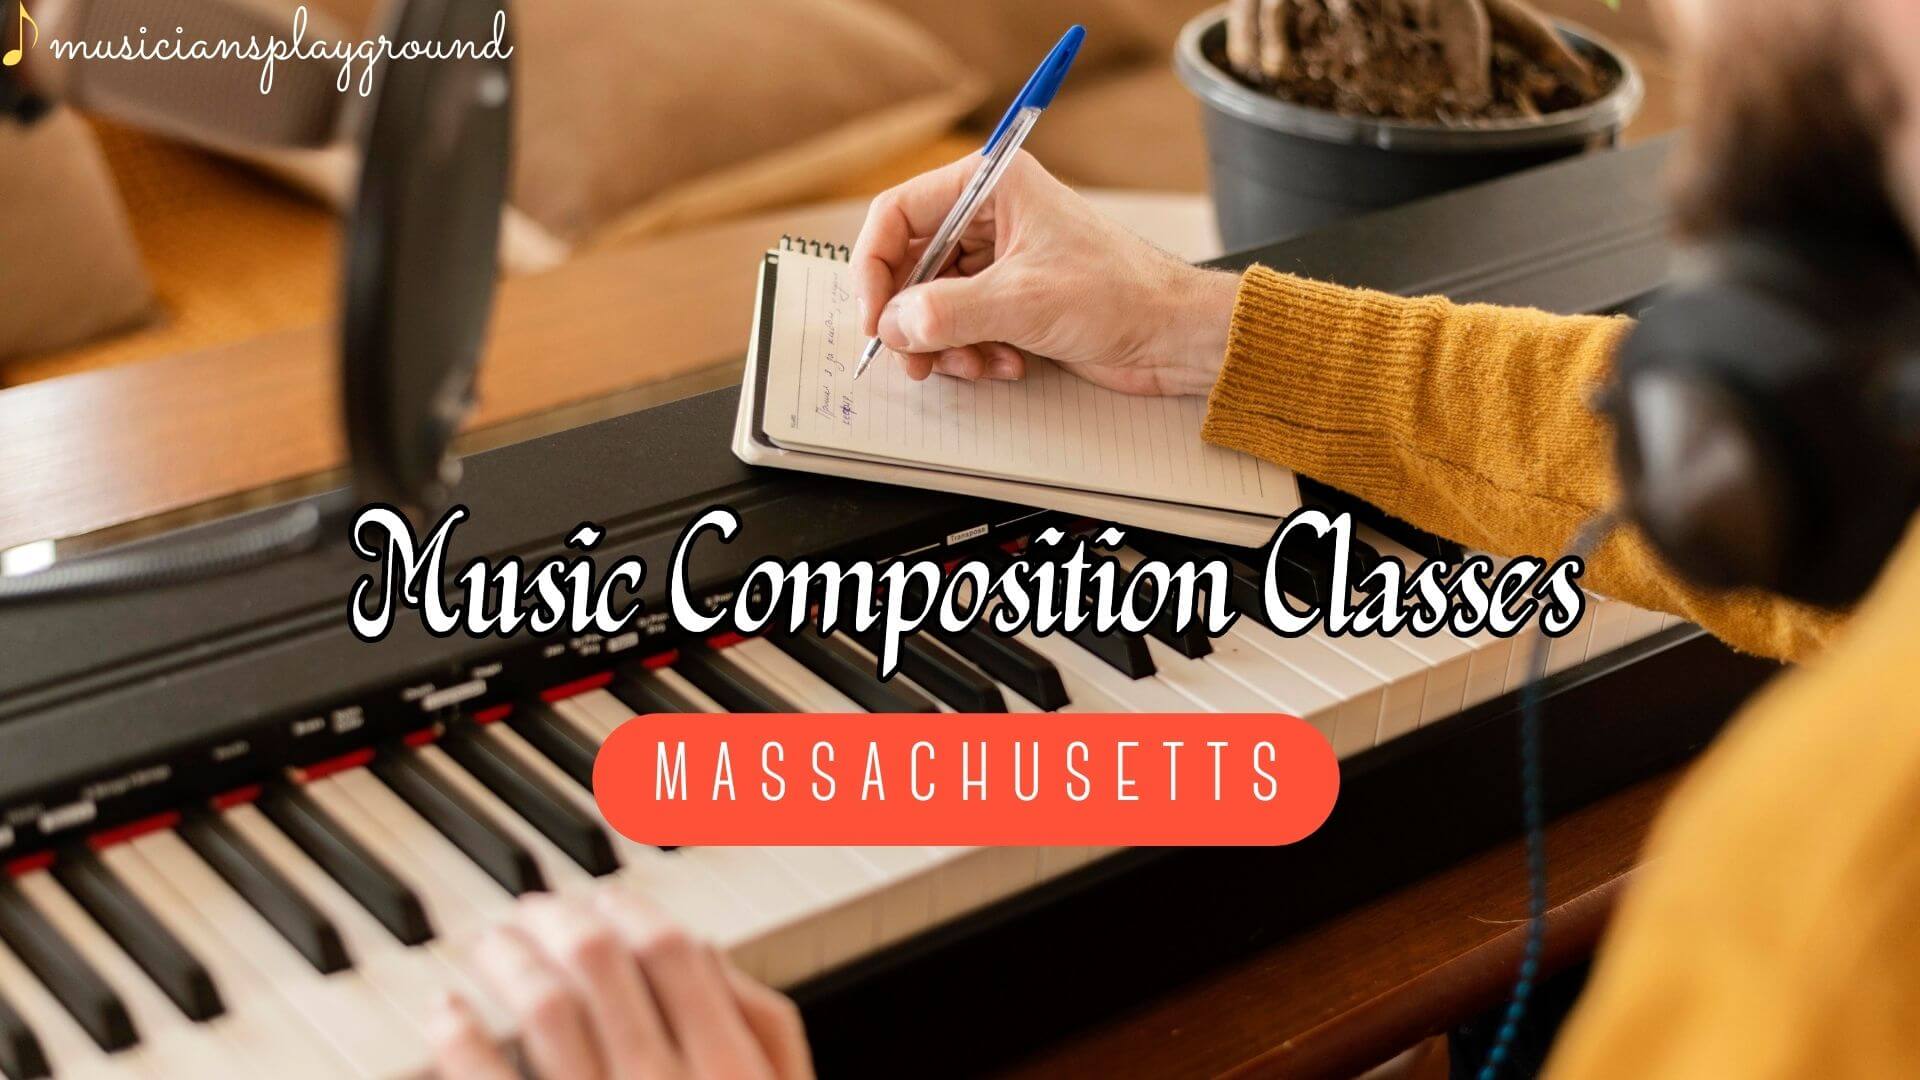 Music Composition Classes in Massachusetts: Enhance Your Musical Skills at Musicians Playground